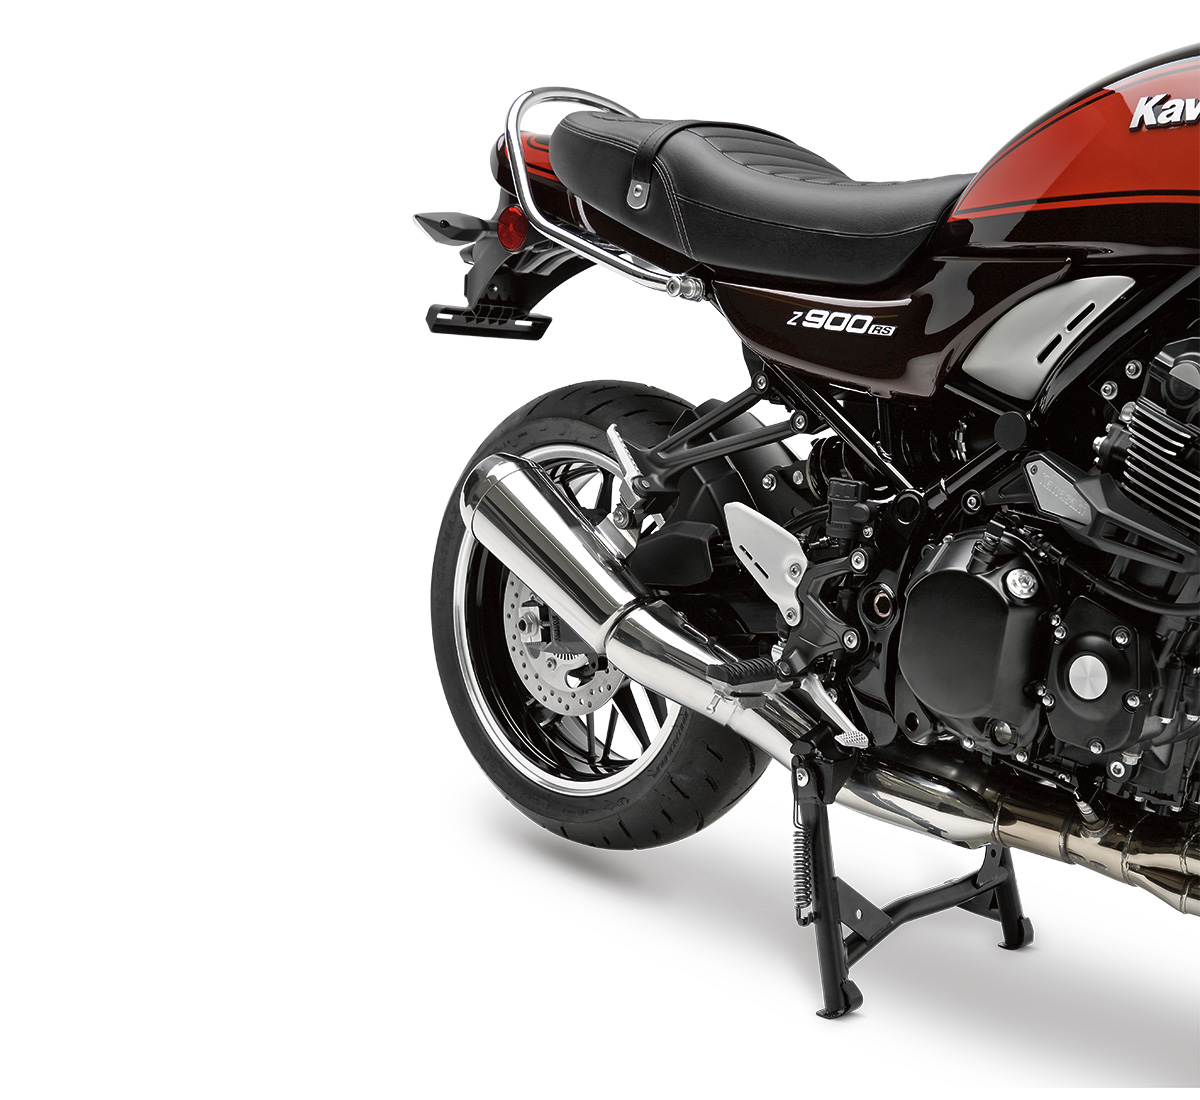 Motorcycle Accessories - Z900 RS CAFE